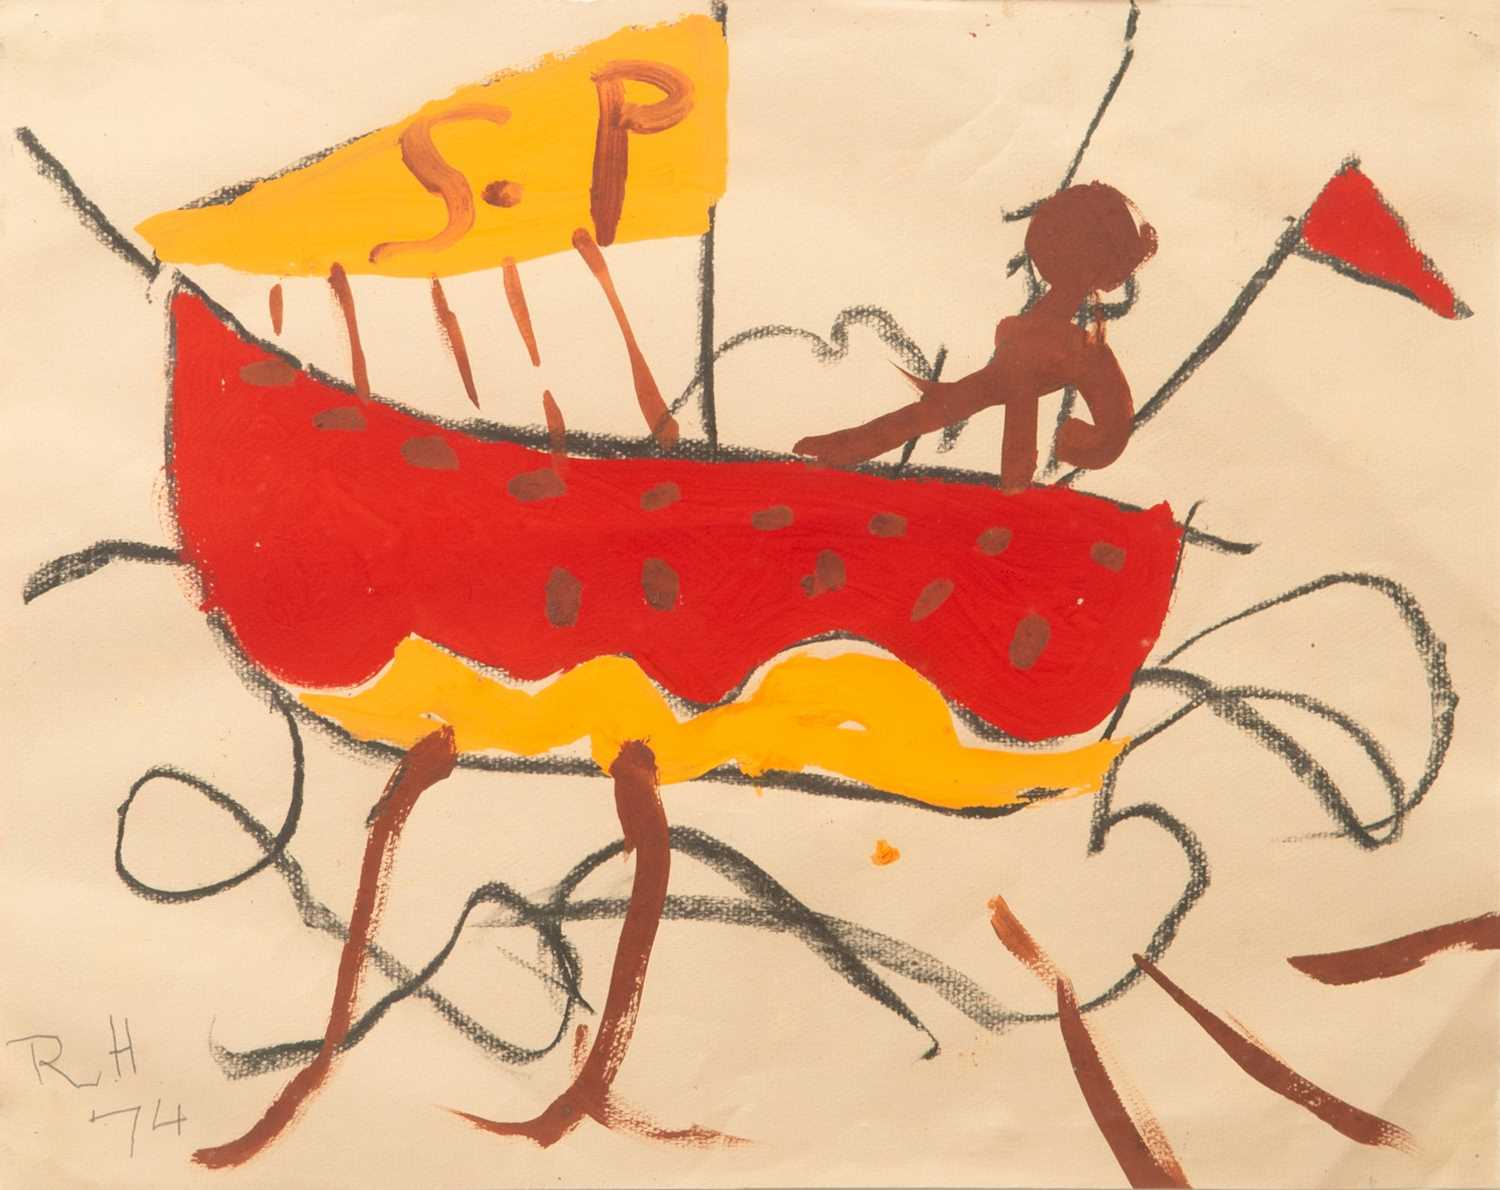 Roger HILTON (1911-1975) Boat with Man and Flag, 1974